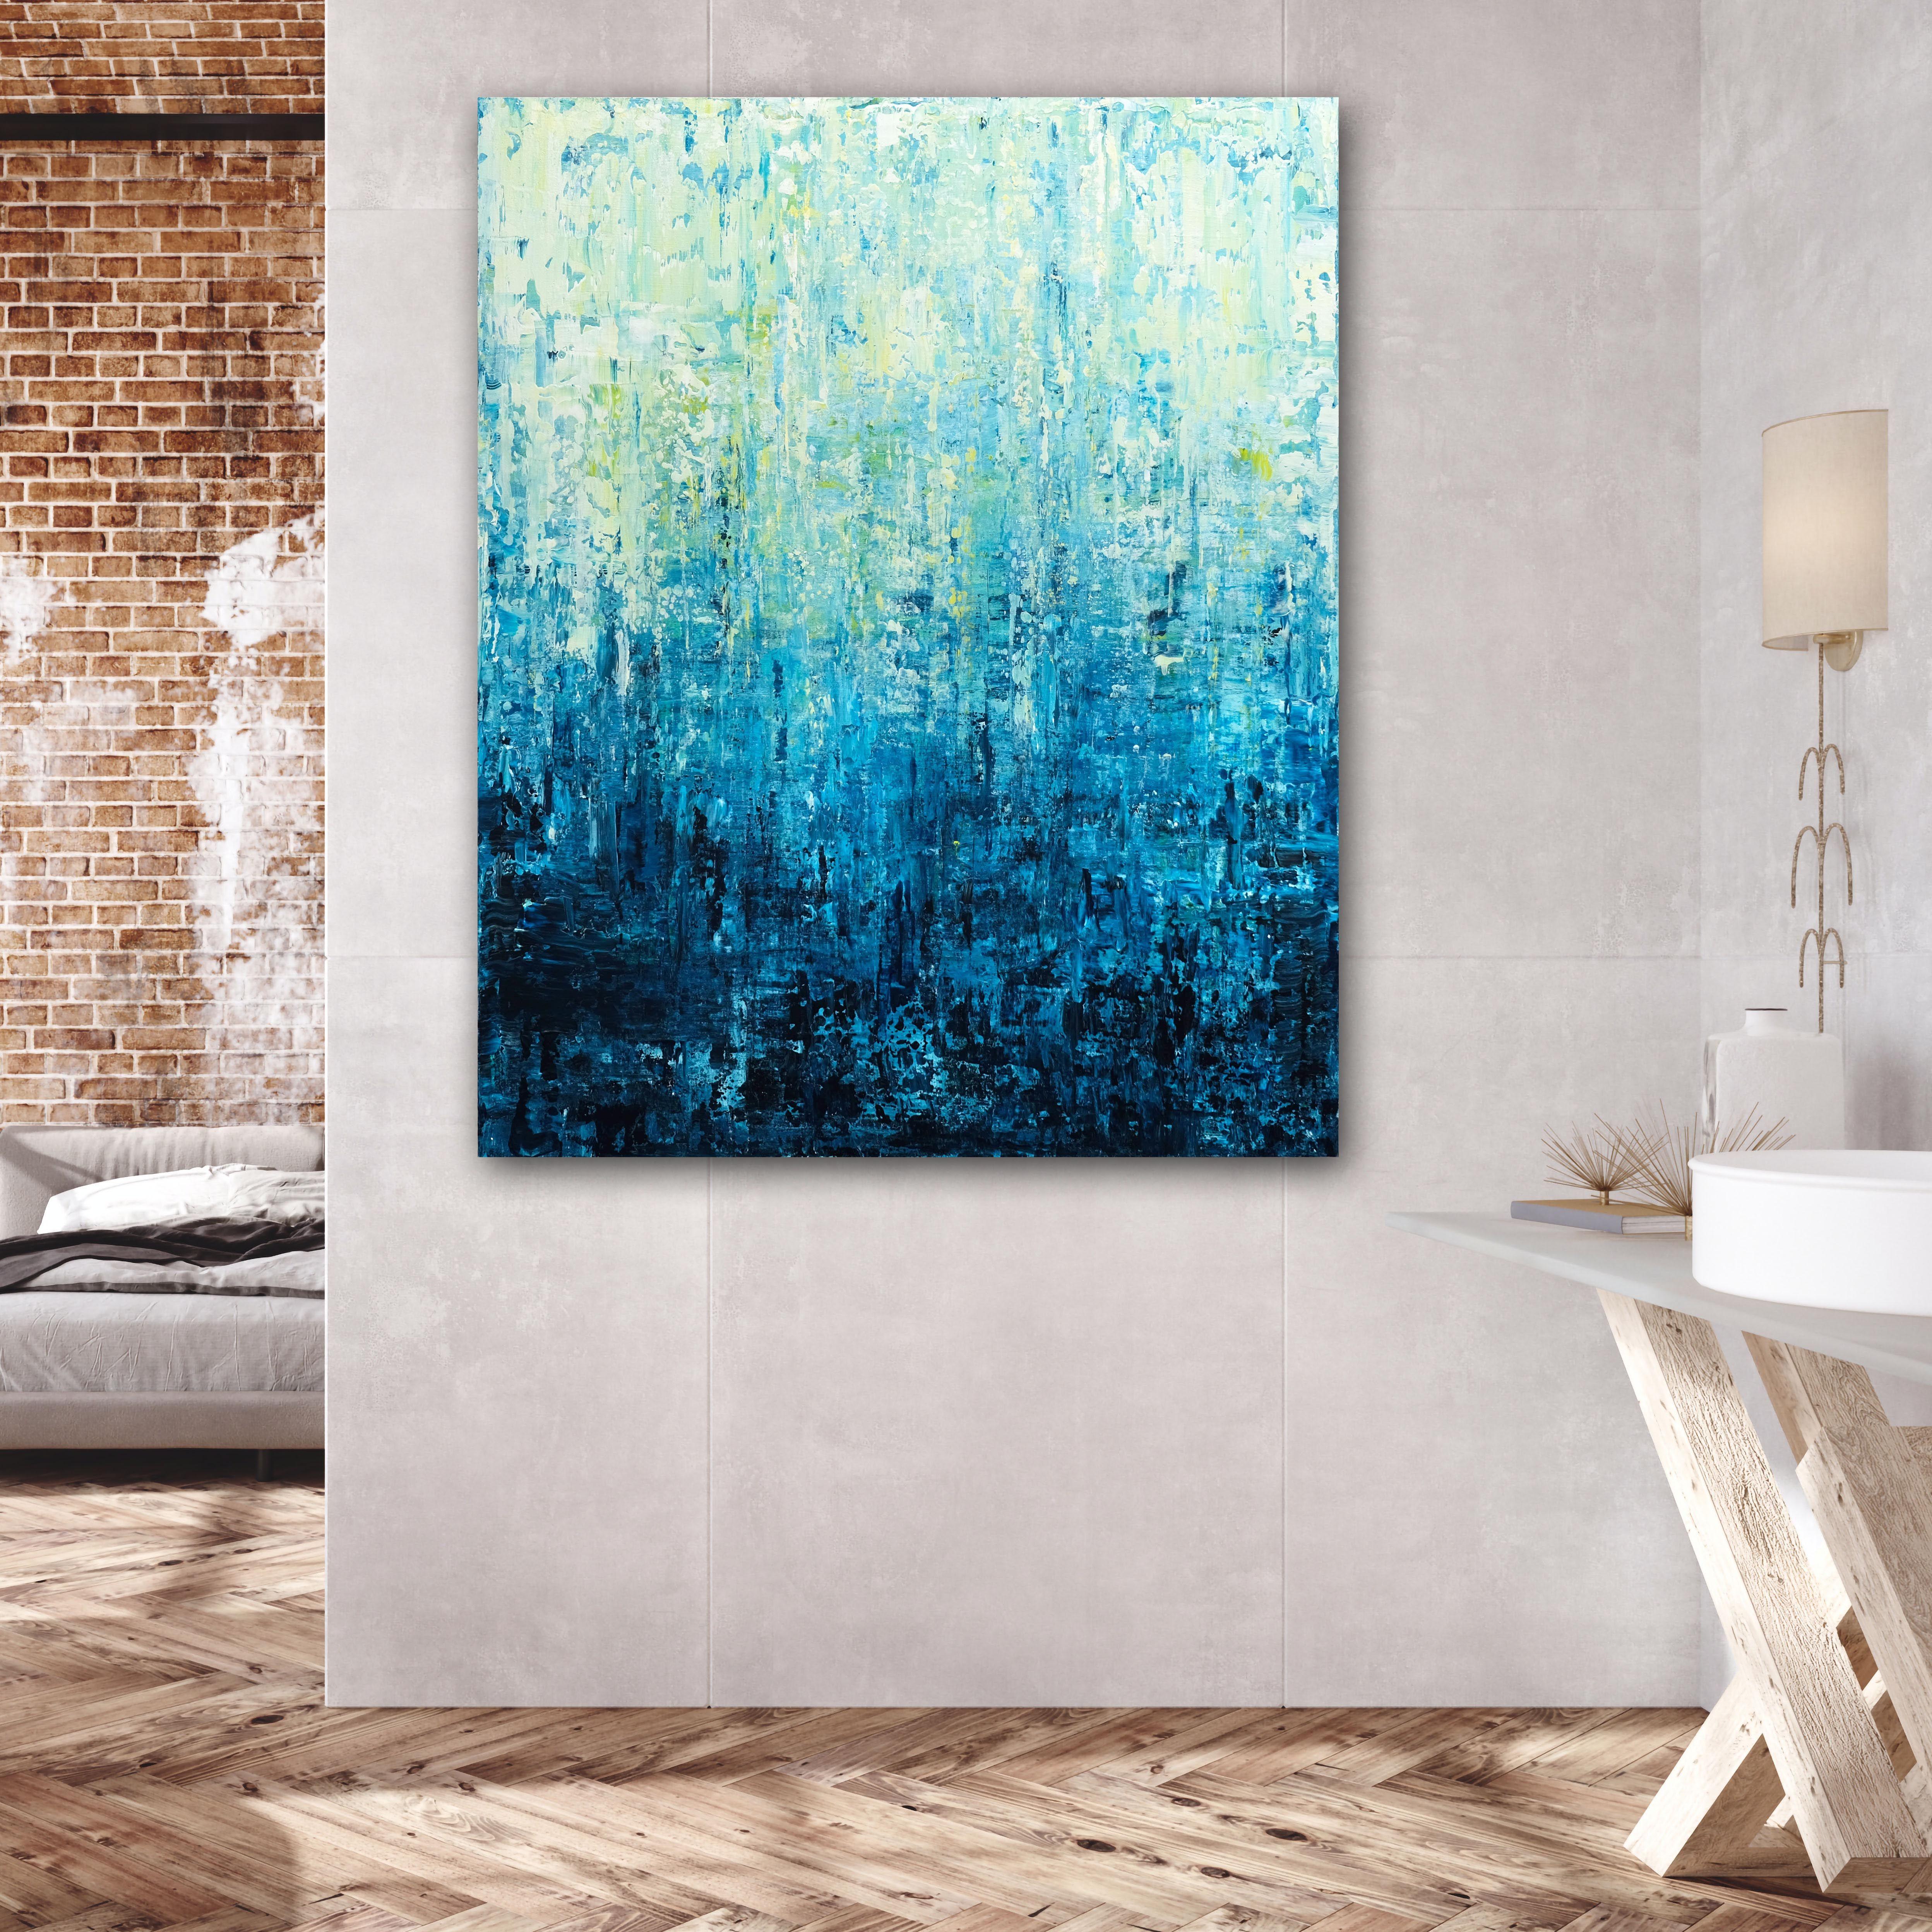 Turquoise Dream, Painting, Acrylic on Canvas - Blue Abstract Painting by Behshad Arjomandi